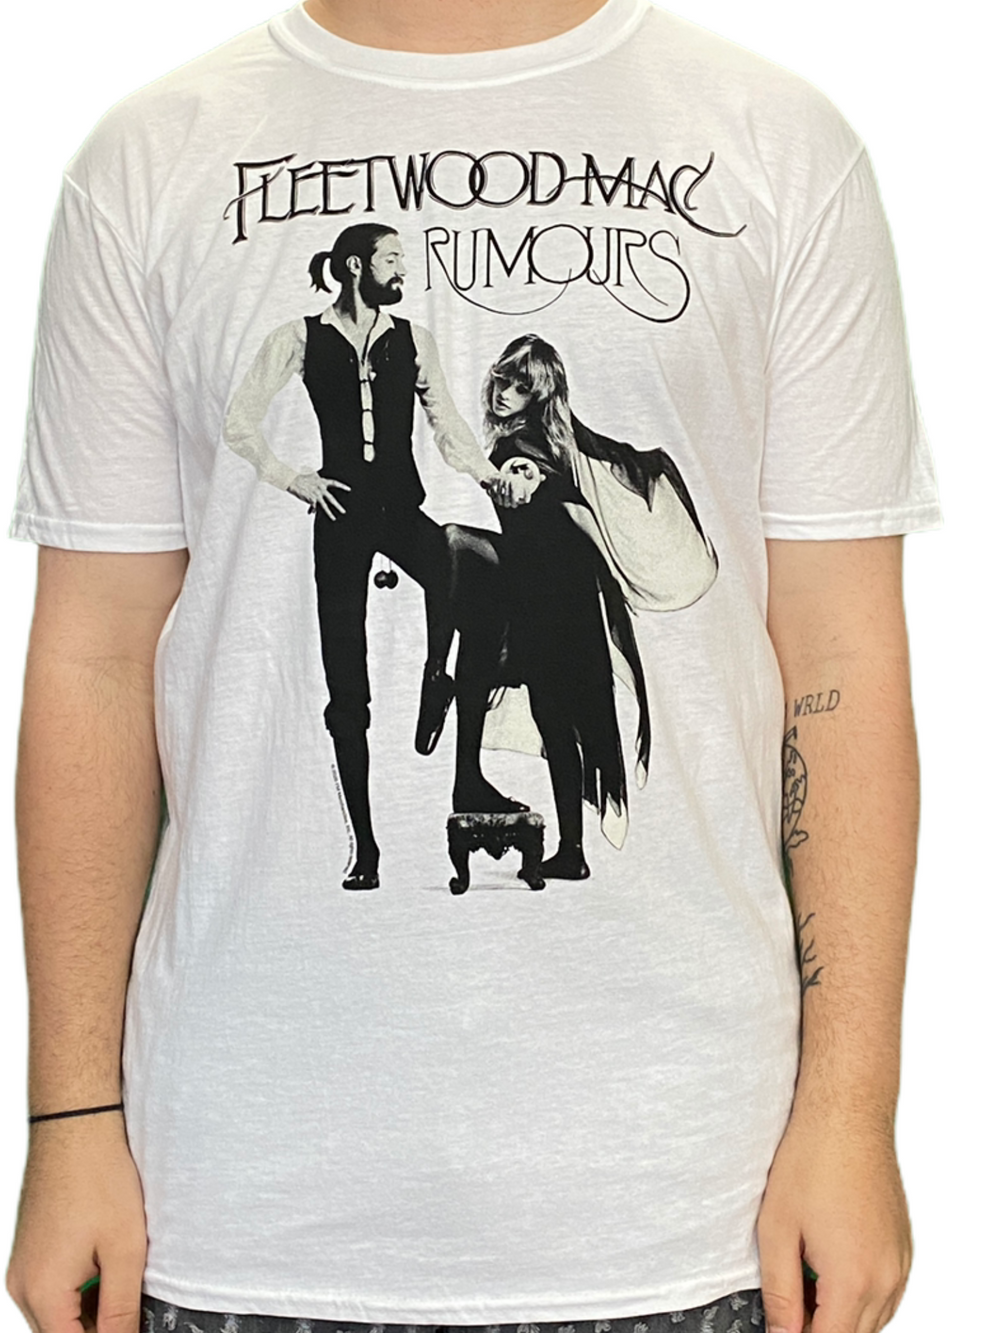 Fleetwood Mac Rumours Unisex Official T Shirt Brand New Various Sizes WHITE